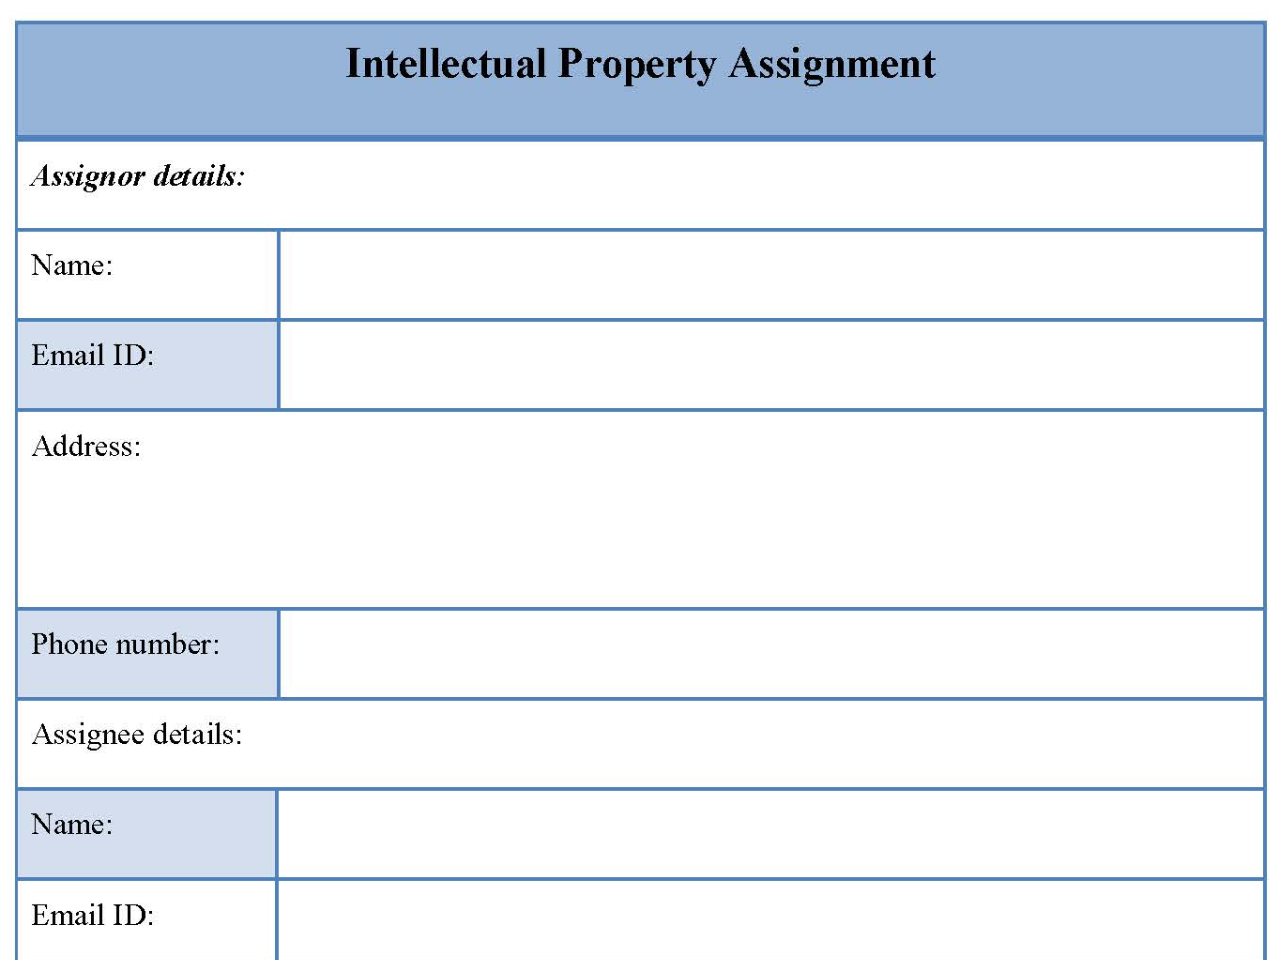 Intellectual Property Assignment Form